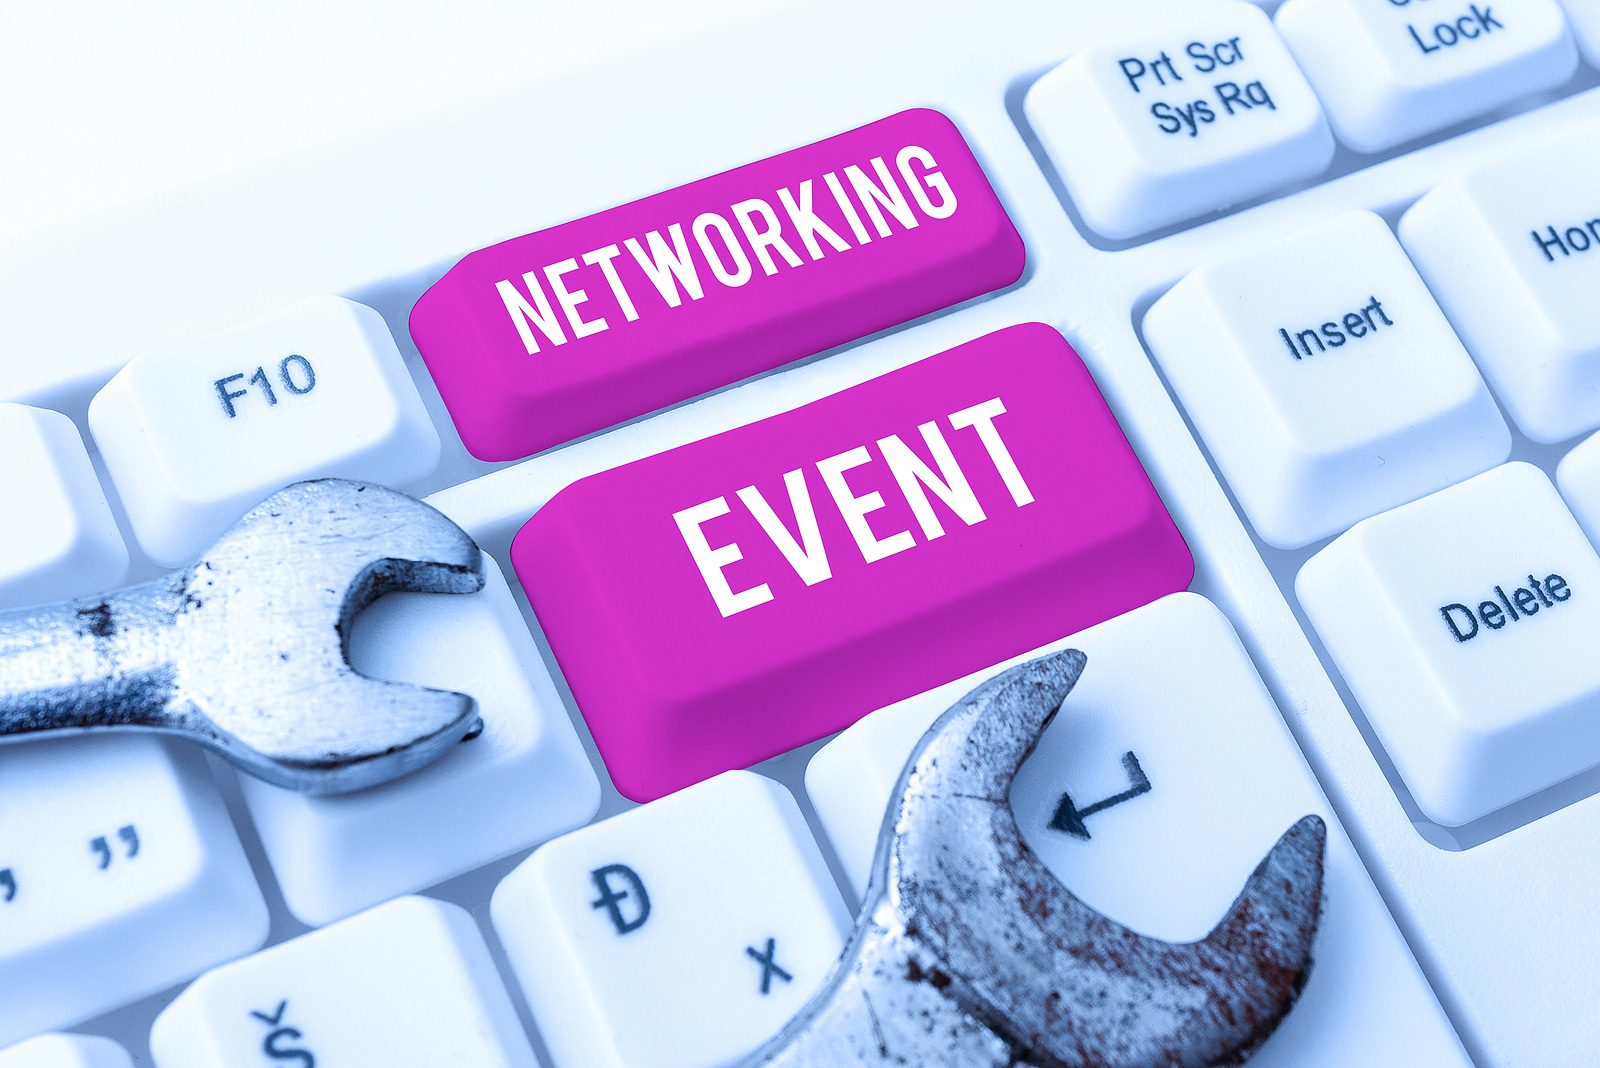 Network Event at Siline's Restaurant and Bar - Ballwin